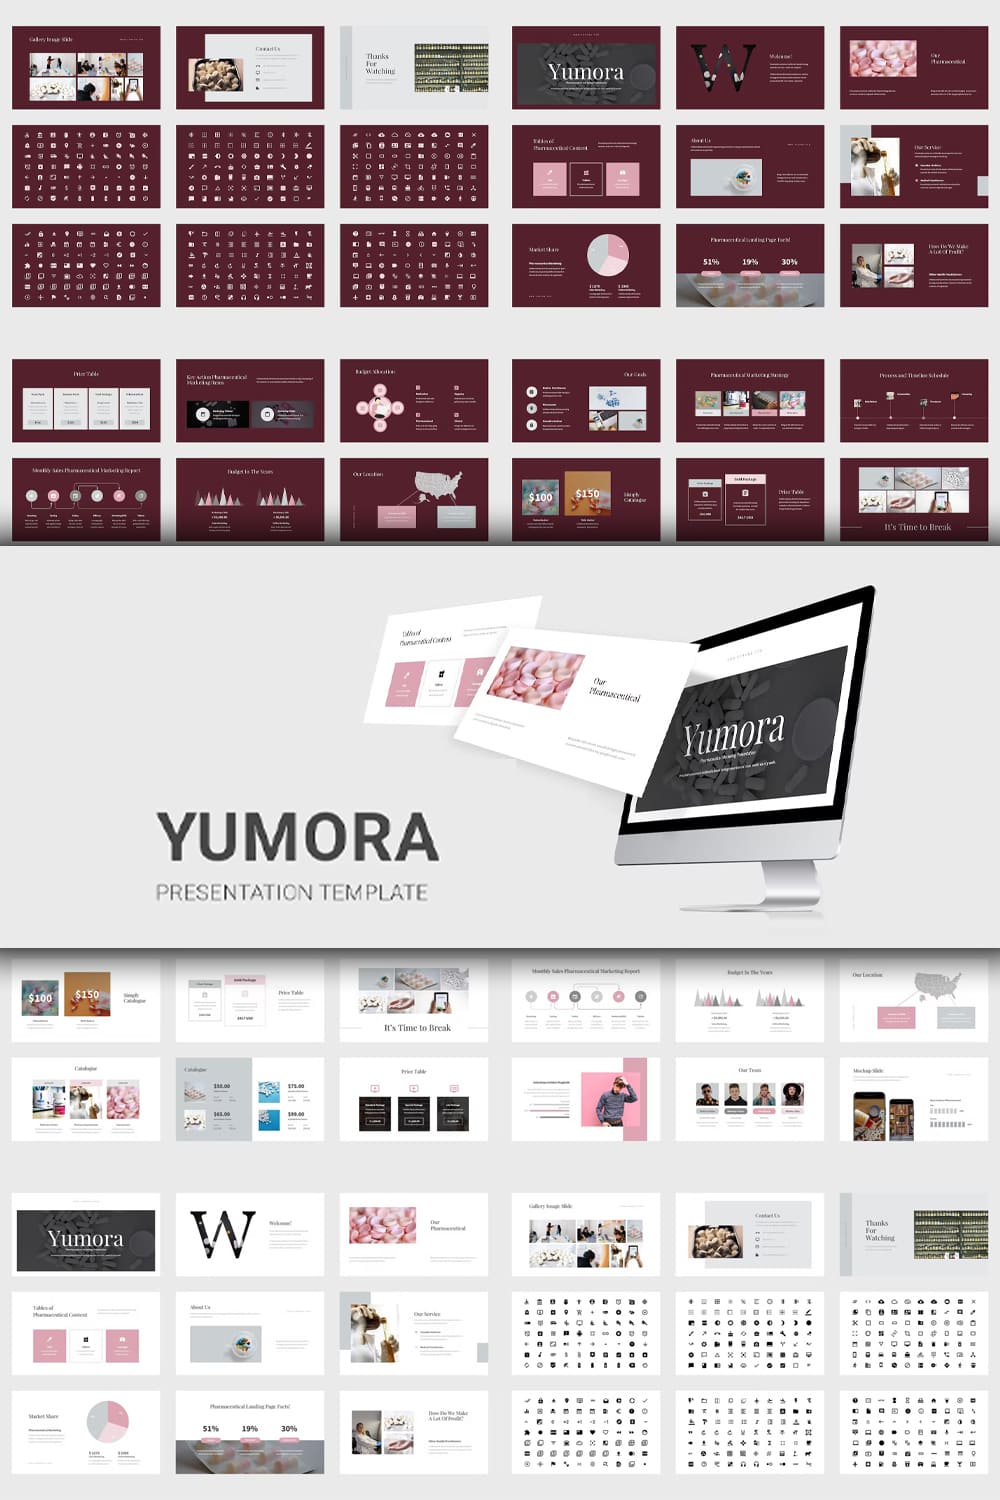 Yumora pharmaceutical business powerpoint - pinterest image preview.